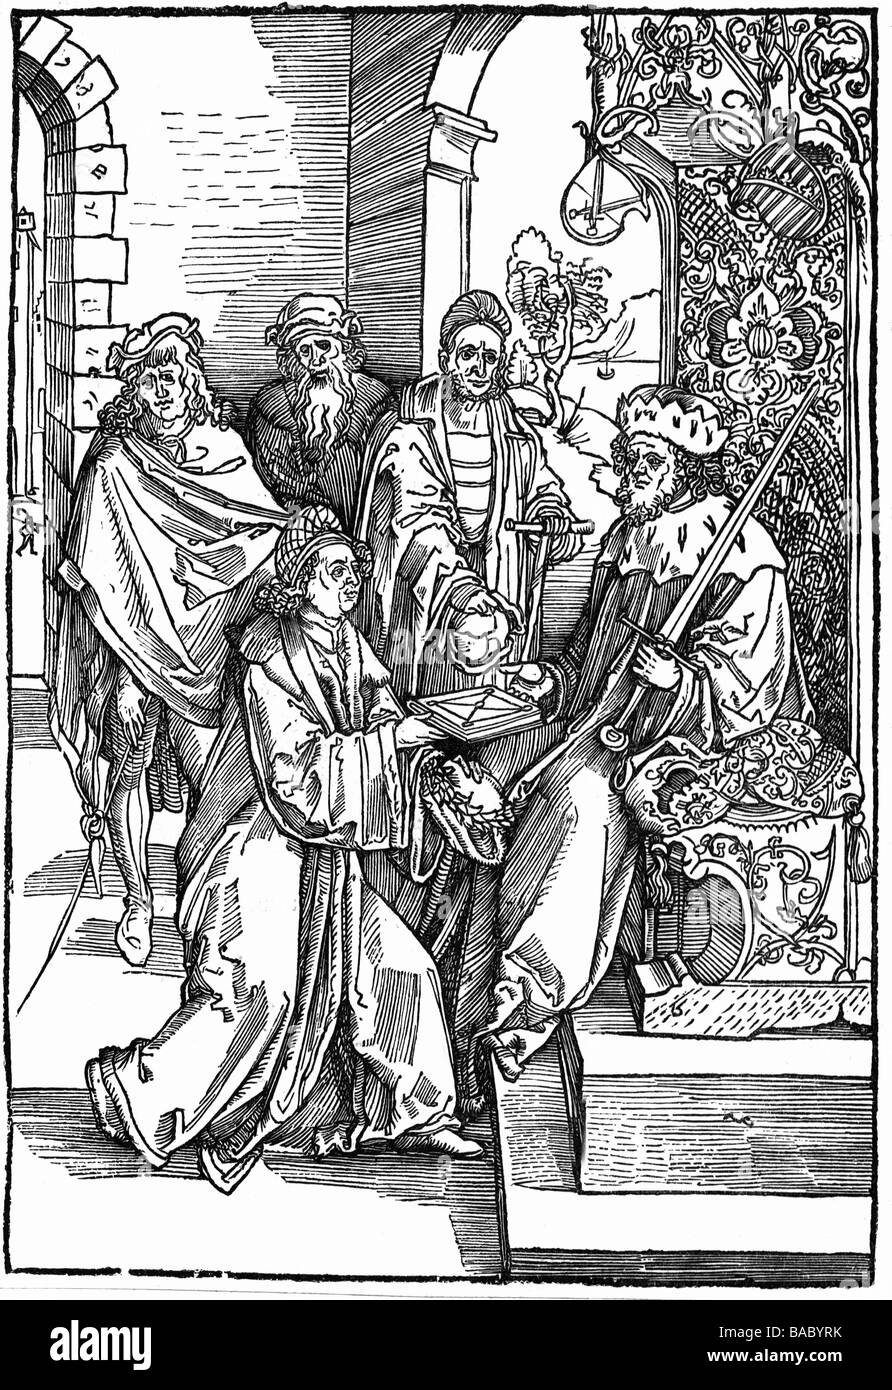 Celtis, Conrad, 1.2.1459 - 4.2.1508, German author / writer, humanist, presenting Emperor Frederick III with his works, woodcut by Albrecht Duerer, title page of 'Opera Hrosvite...', Nuremberg, 1501, , Artist's Copyright has not to be cleared Stock Photo